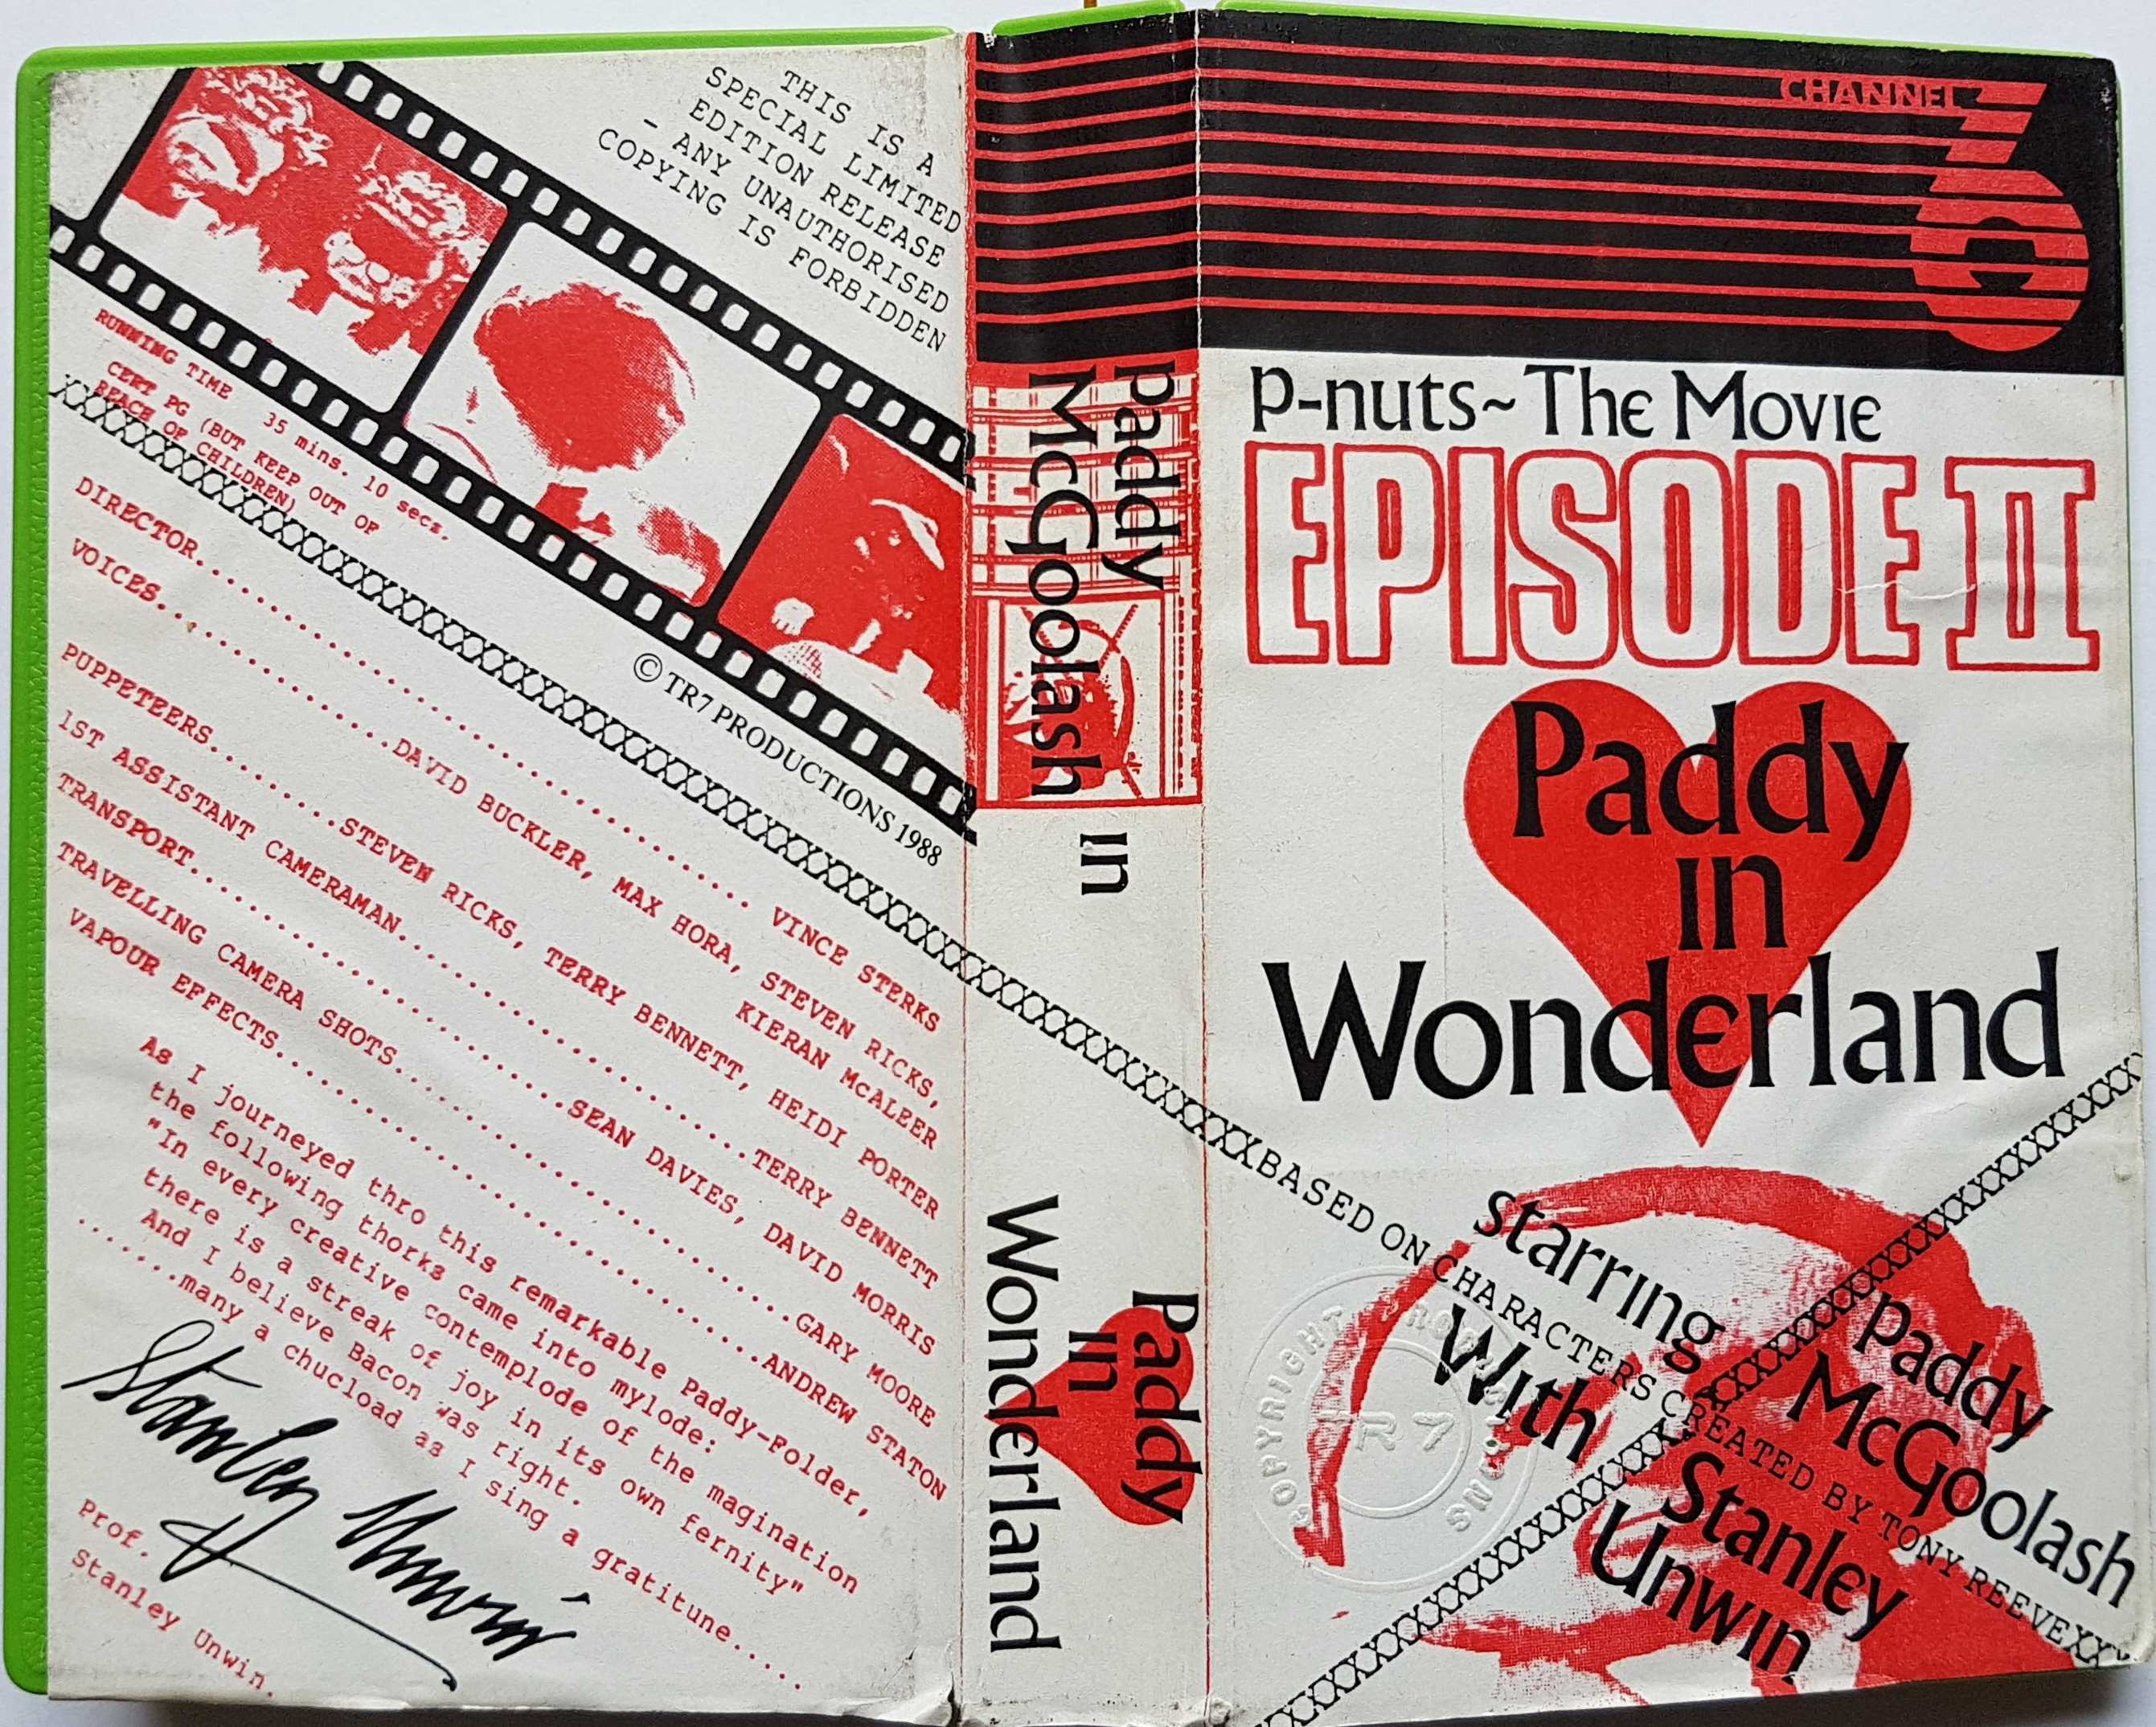 Picture of videos-PM-PIW Paddy McGoolash - Paddy in Wonderland by artist Unknown from ITV, Channel 4 and Channel 5 library